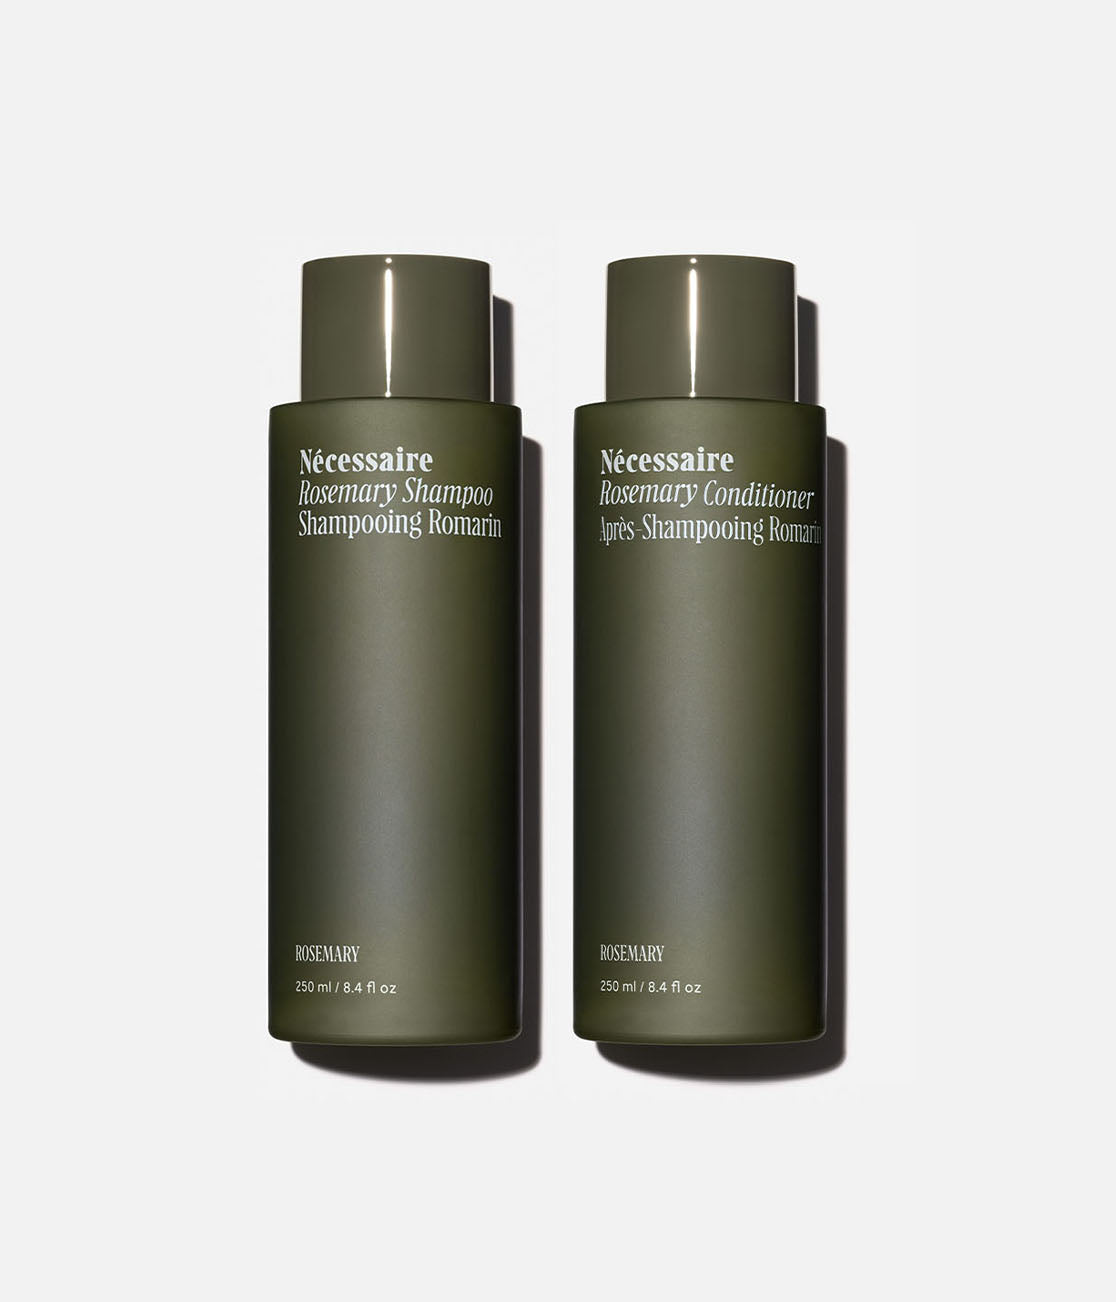 Rosemary – Nécessaire, A Personal Care Company